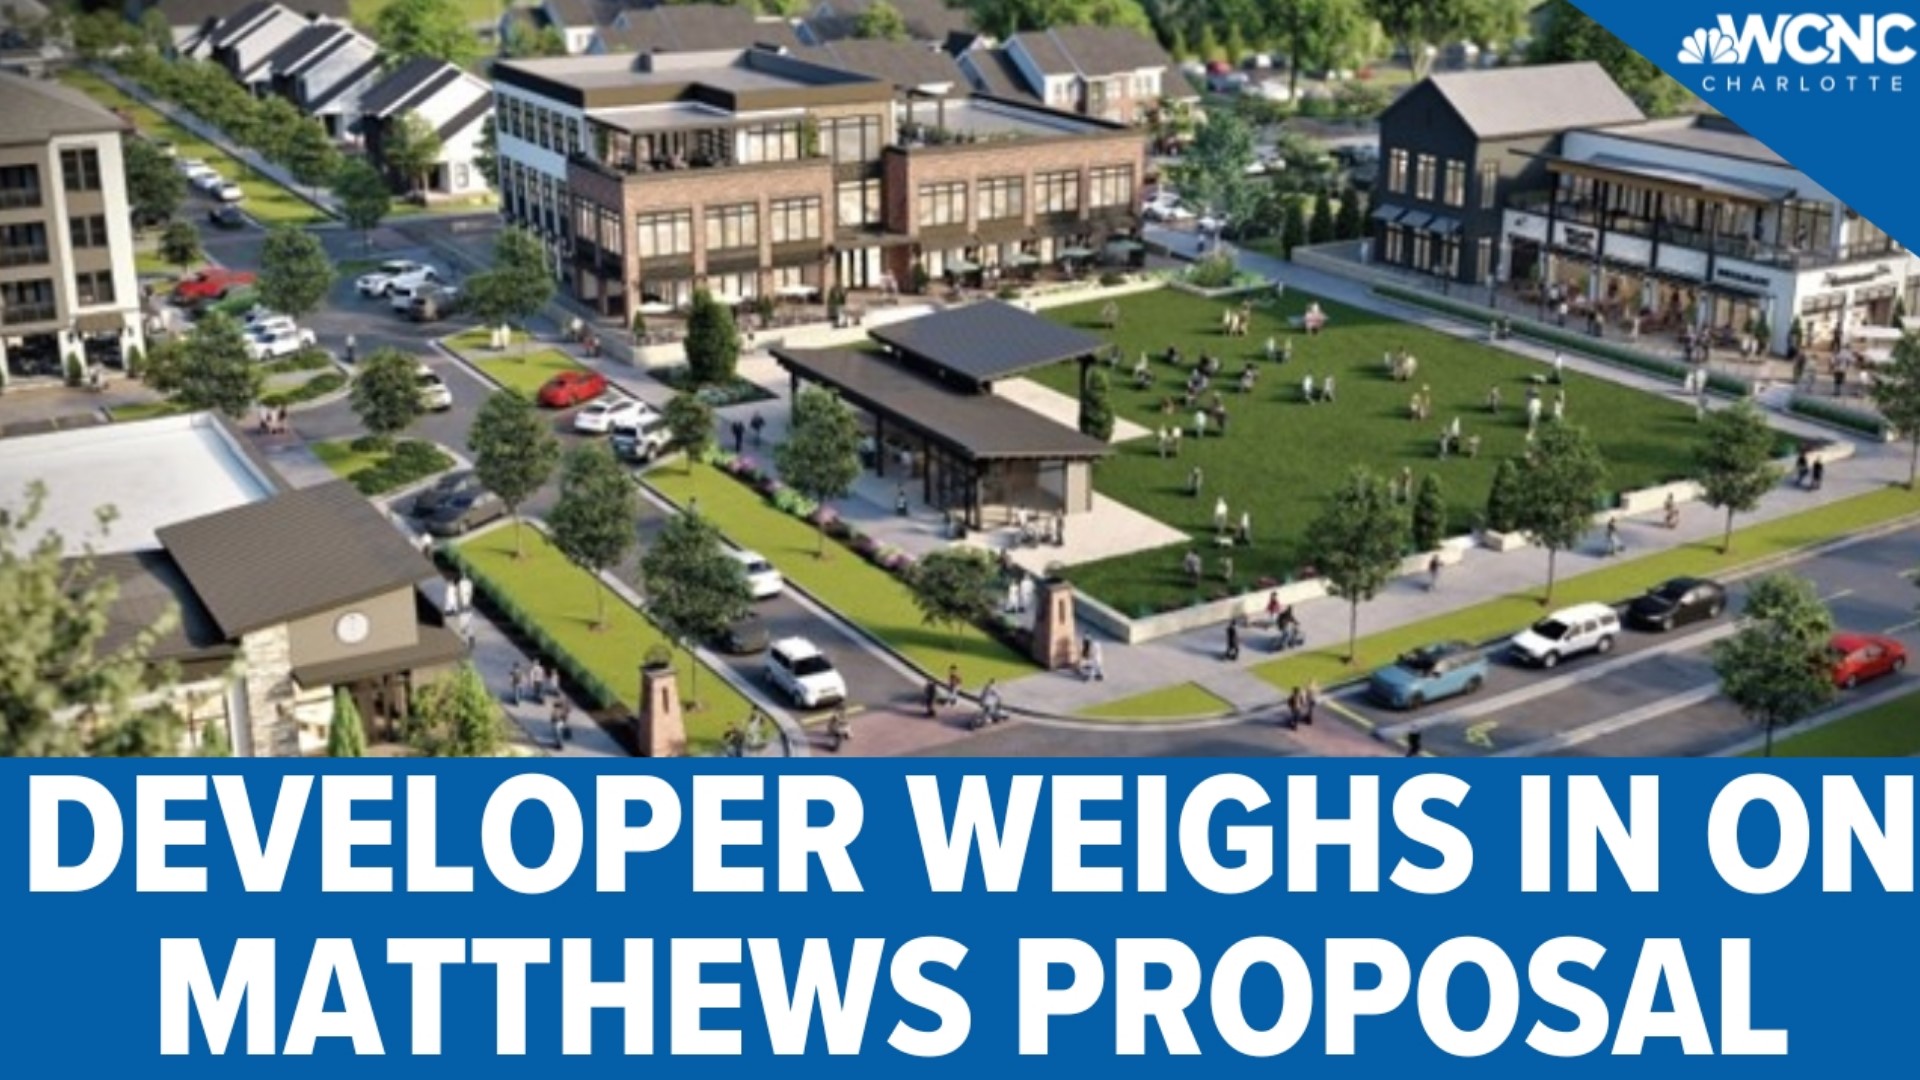 The Sante Matthews plans consist of single family homes, town homes, apartments, 55 plus living, commercial and office space.